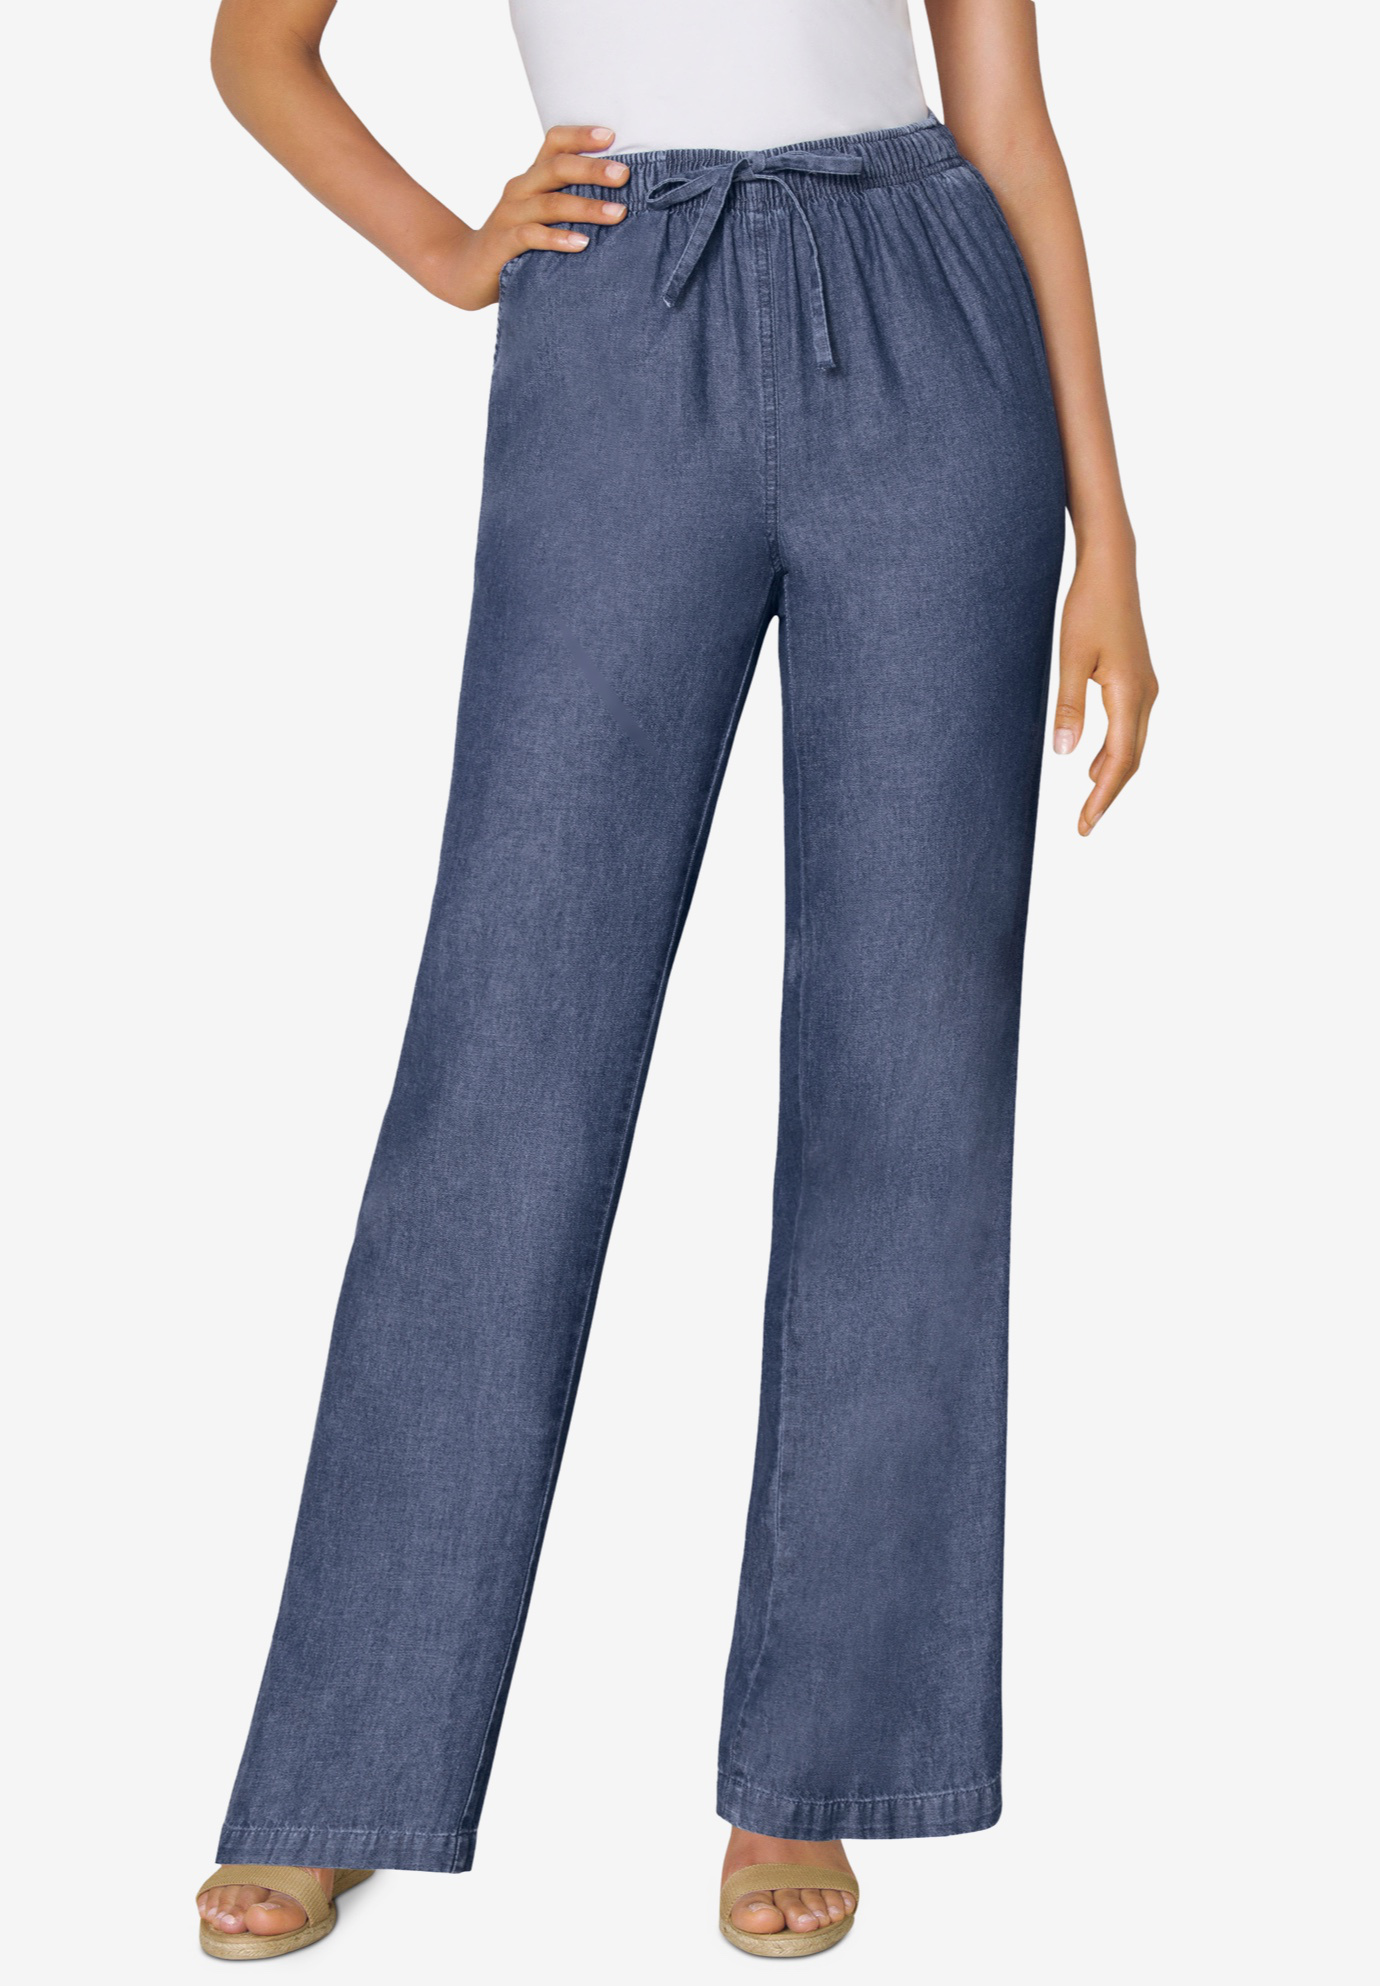 Pull-On Elastic Waist Cotton Chambray Pants | Woman Within